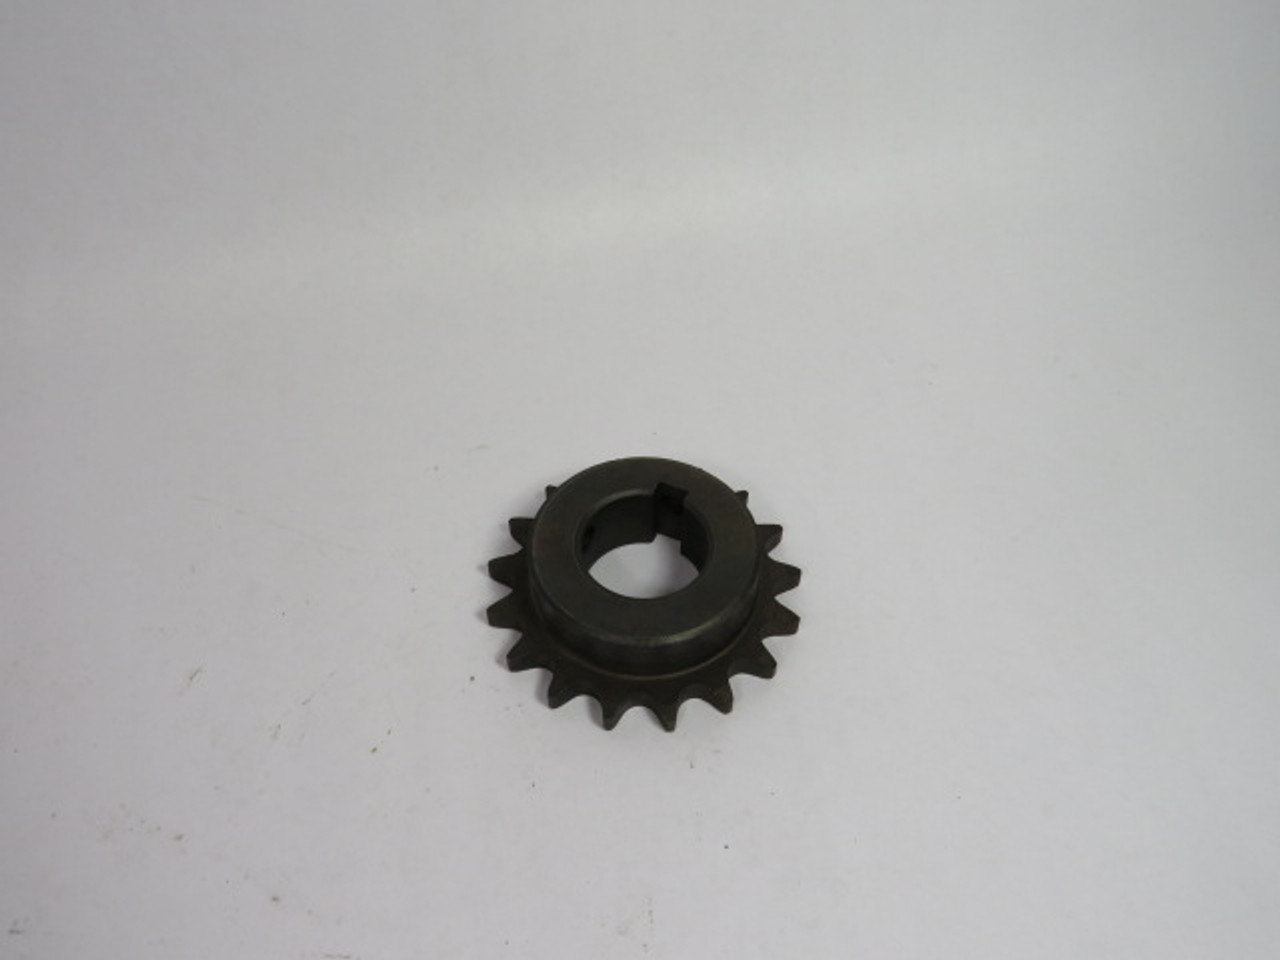 Martin 50BS17-1-7/16 Roller Sprocket 1-7/16" Bore USED